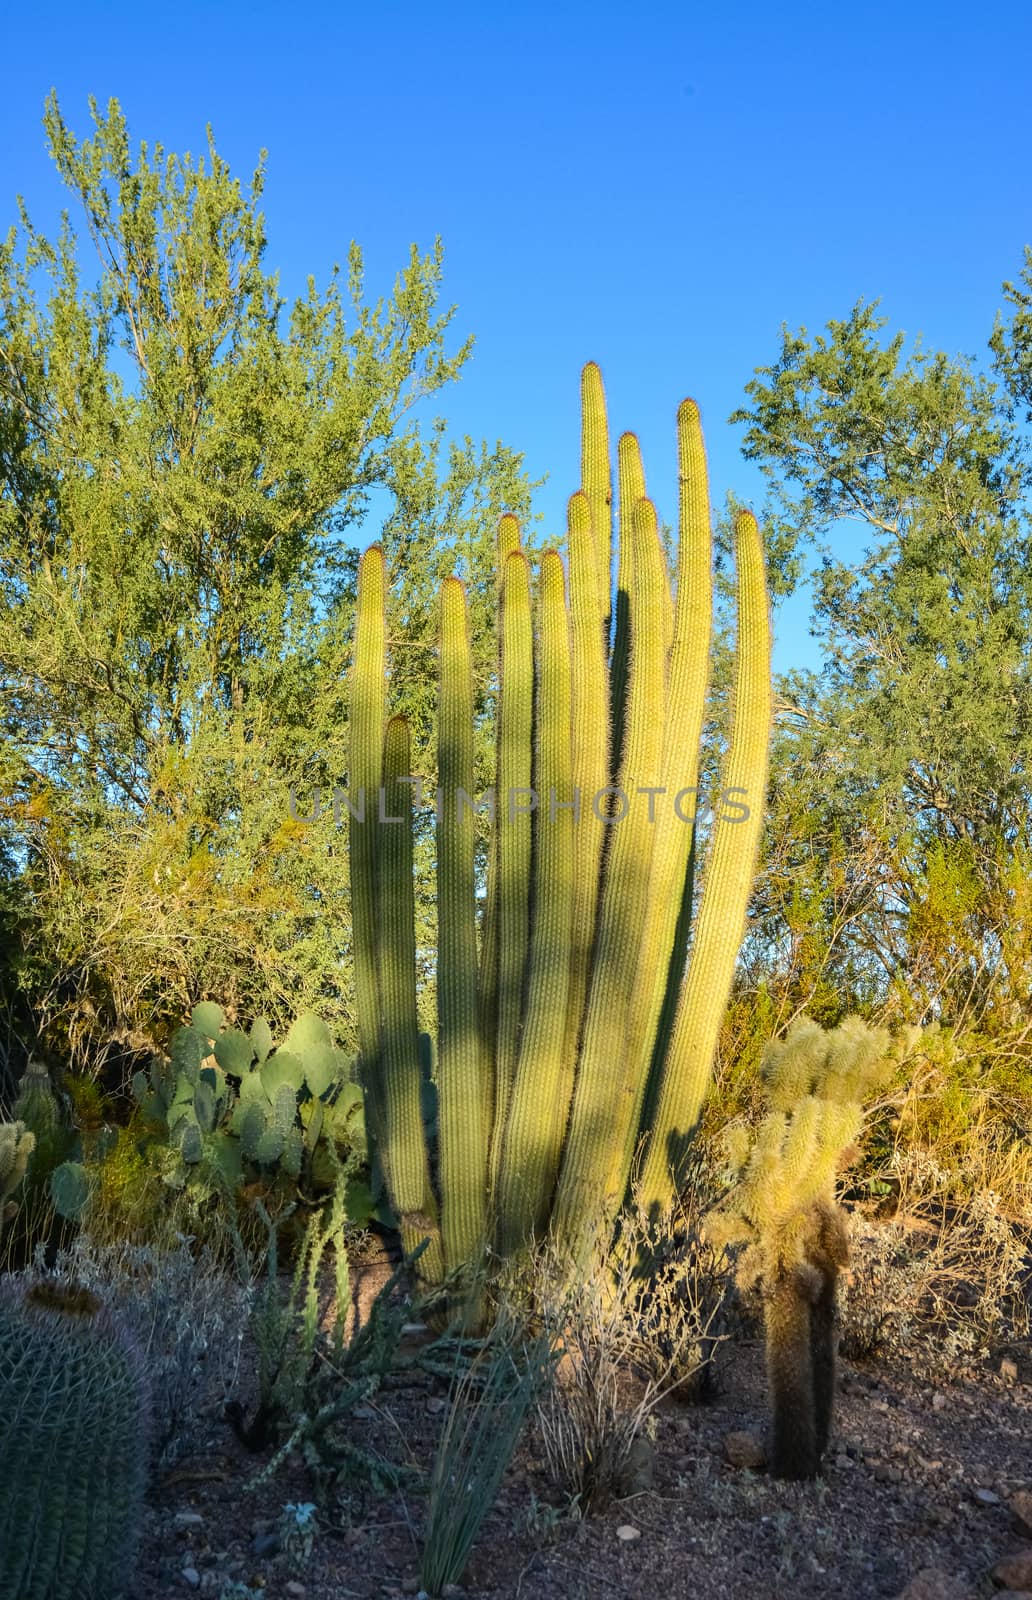 A group of succulent plants Agave and Opuntia cacti in the botanical garden of Phoenix, Arizona, USA
